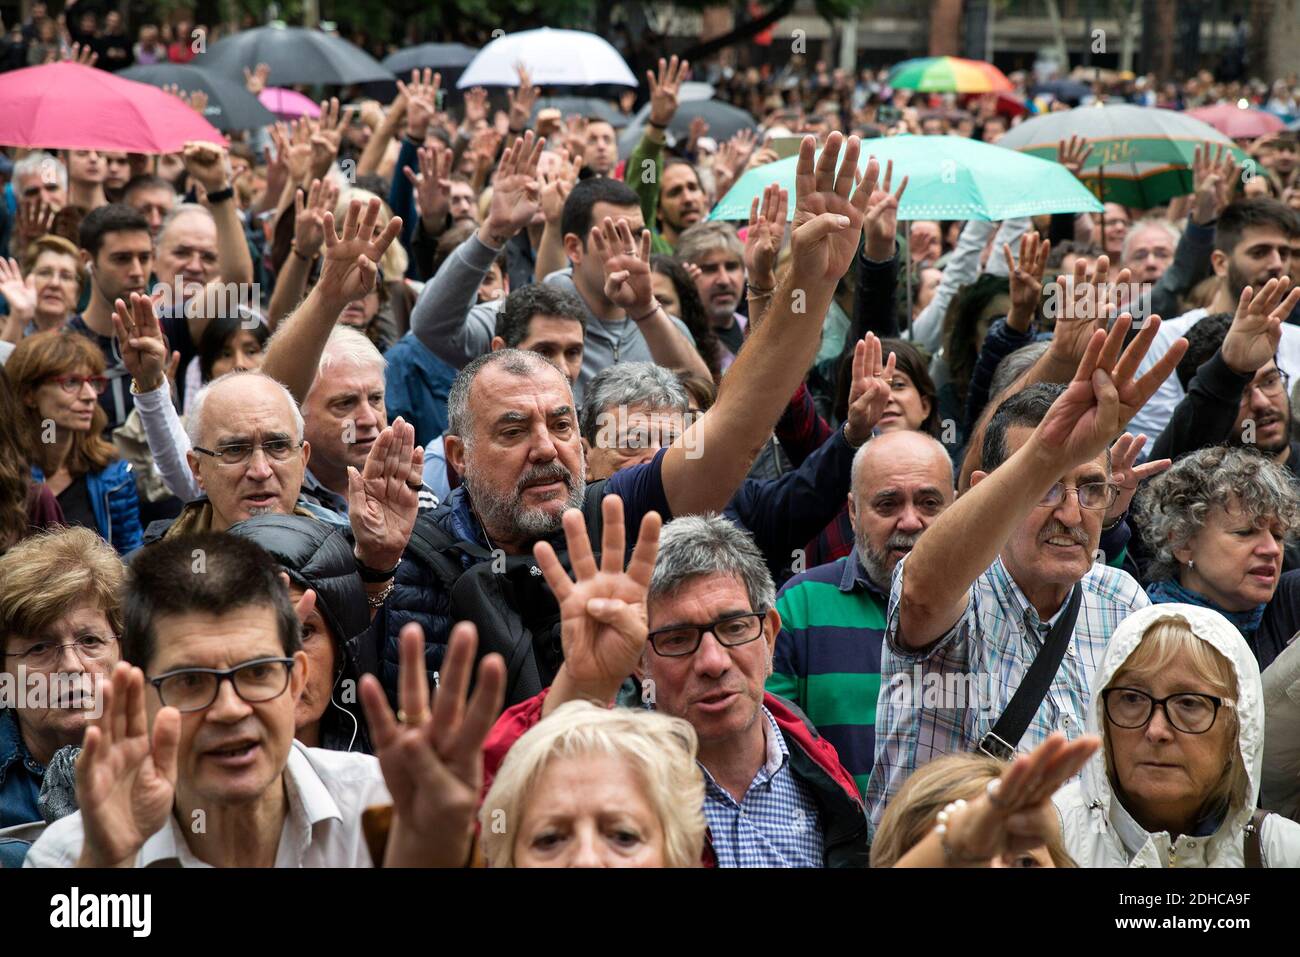 Hundreds of people sings tyical catalan songs while they wait to vote at Escola de Treball school for the Catalonian independence referendum. The referendum is considered by the central government as a violation of the Spanish constitution. Barcelona, Spain, on October 01, 2017. Photo by Nicolas Carvalho Ochoa/ABACAPRESS.COM Stock Photo